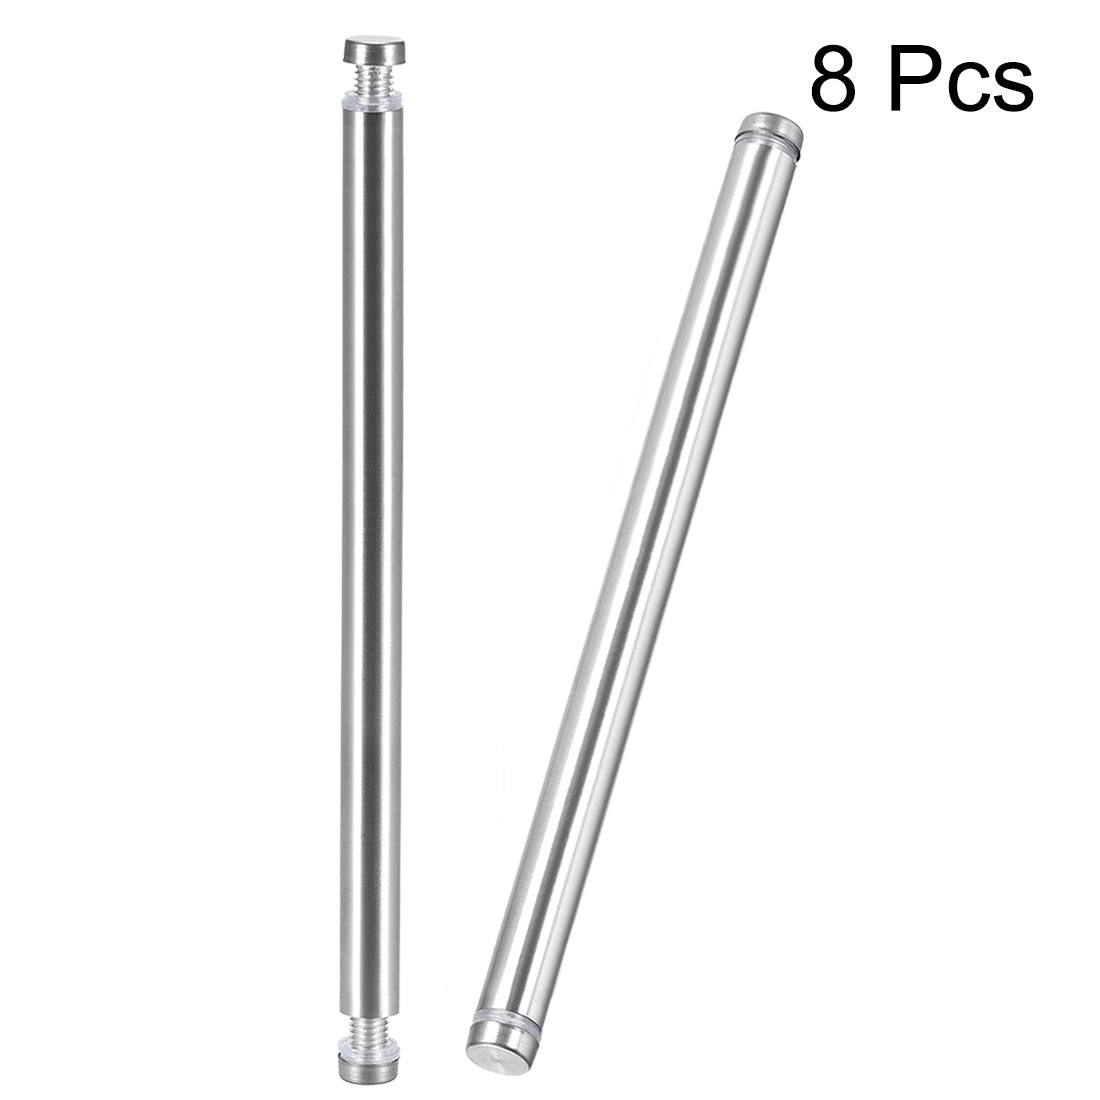 uxcell Uxcell Glass Standoff Double Head Stainless Steel Standoff Holder 12mm x 204mm 8 Pcs